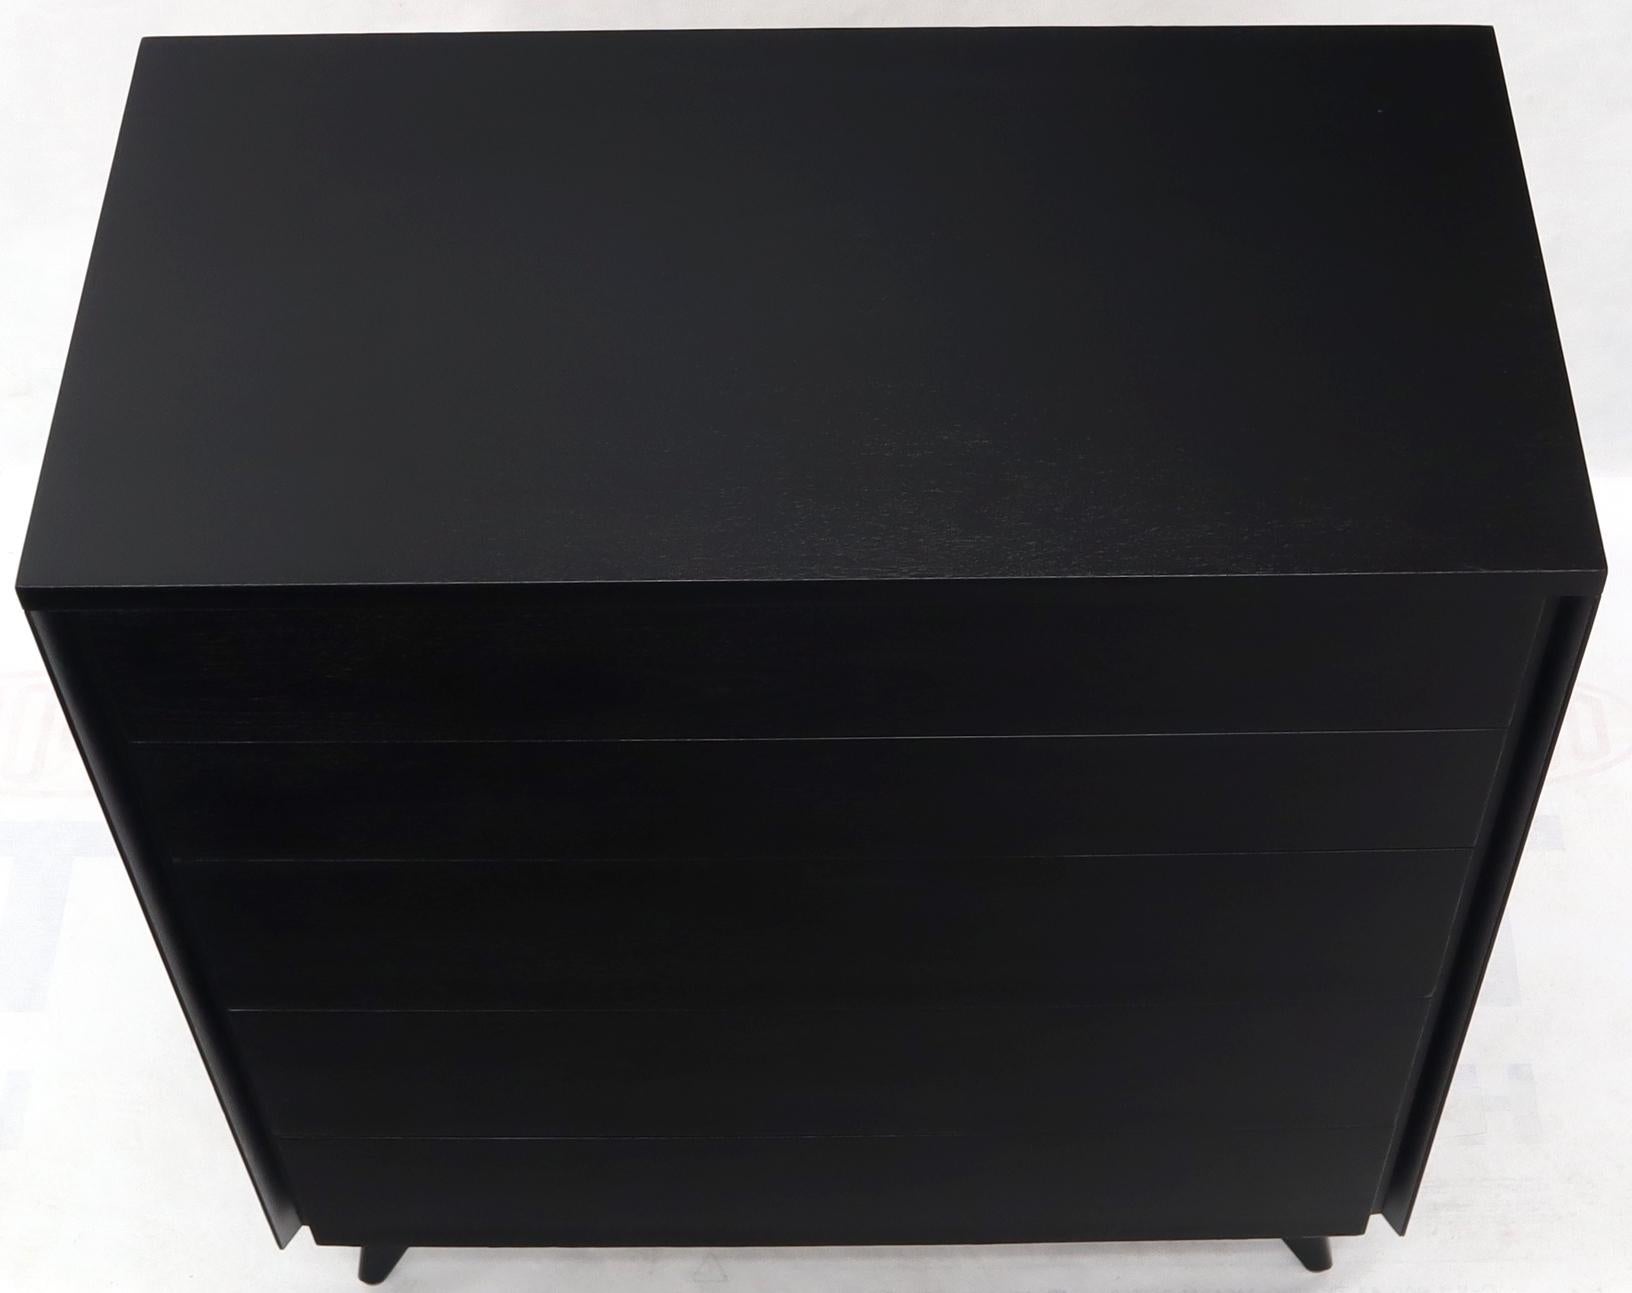 Five Drawers Black Lacquer Mahogany High Chest Dresser by John Stuart In Excellent Condition For Sale In Rockaway, NJ